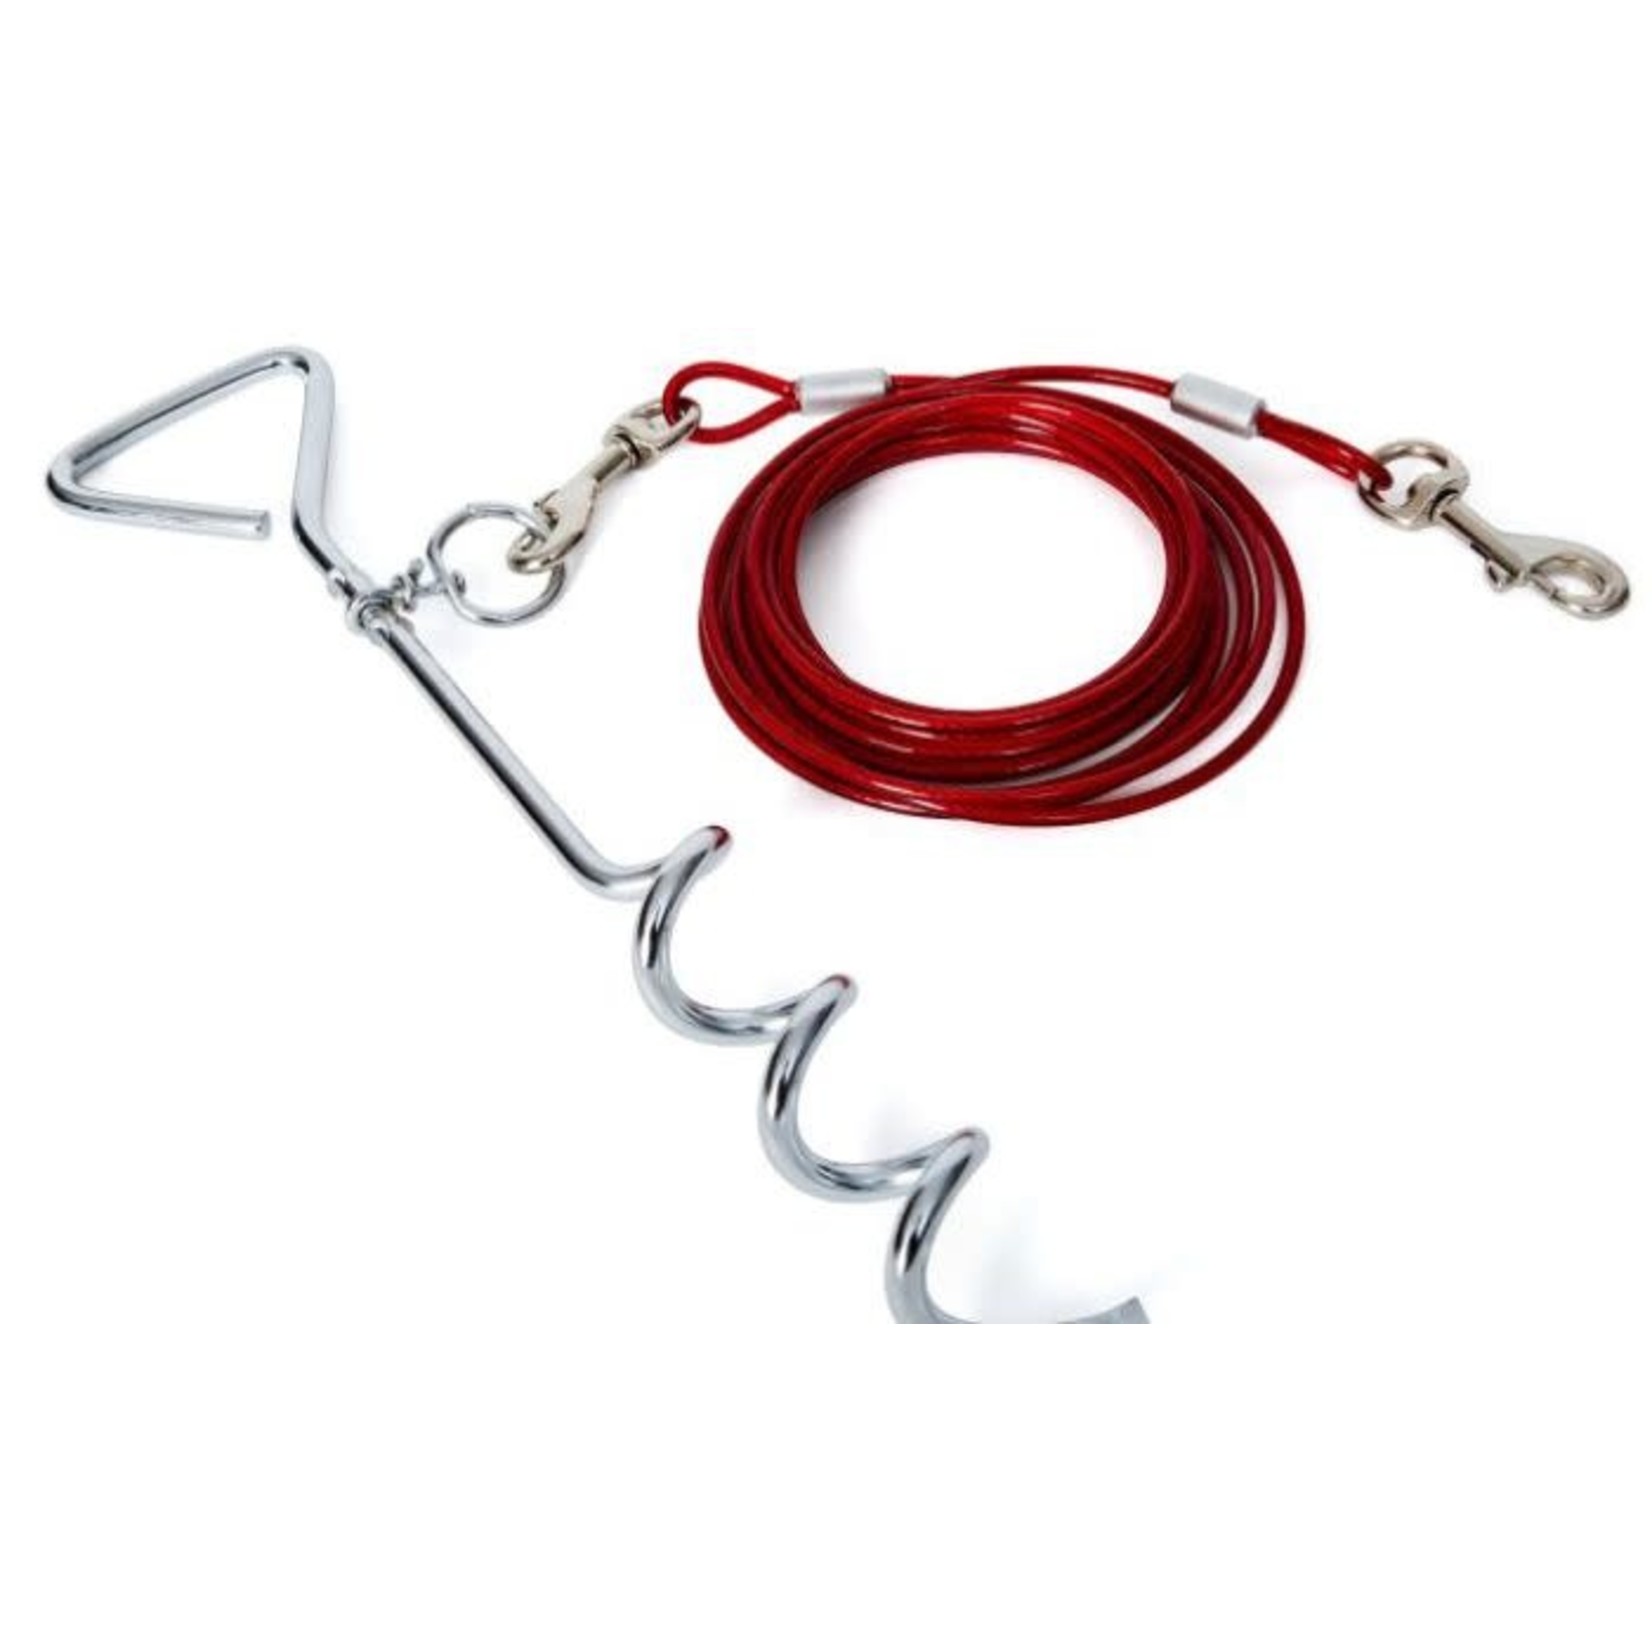 BUD'z BUD'Z Stake & Cable Tie-out for Dogs